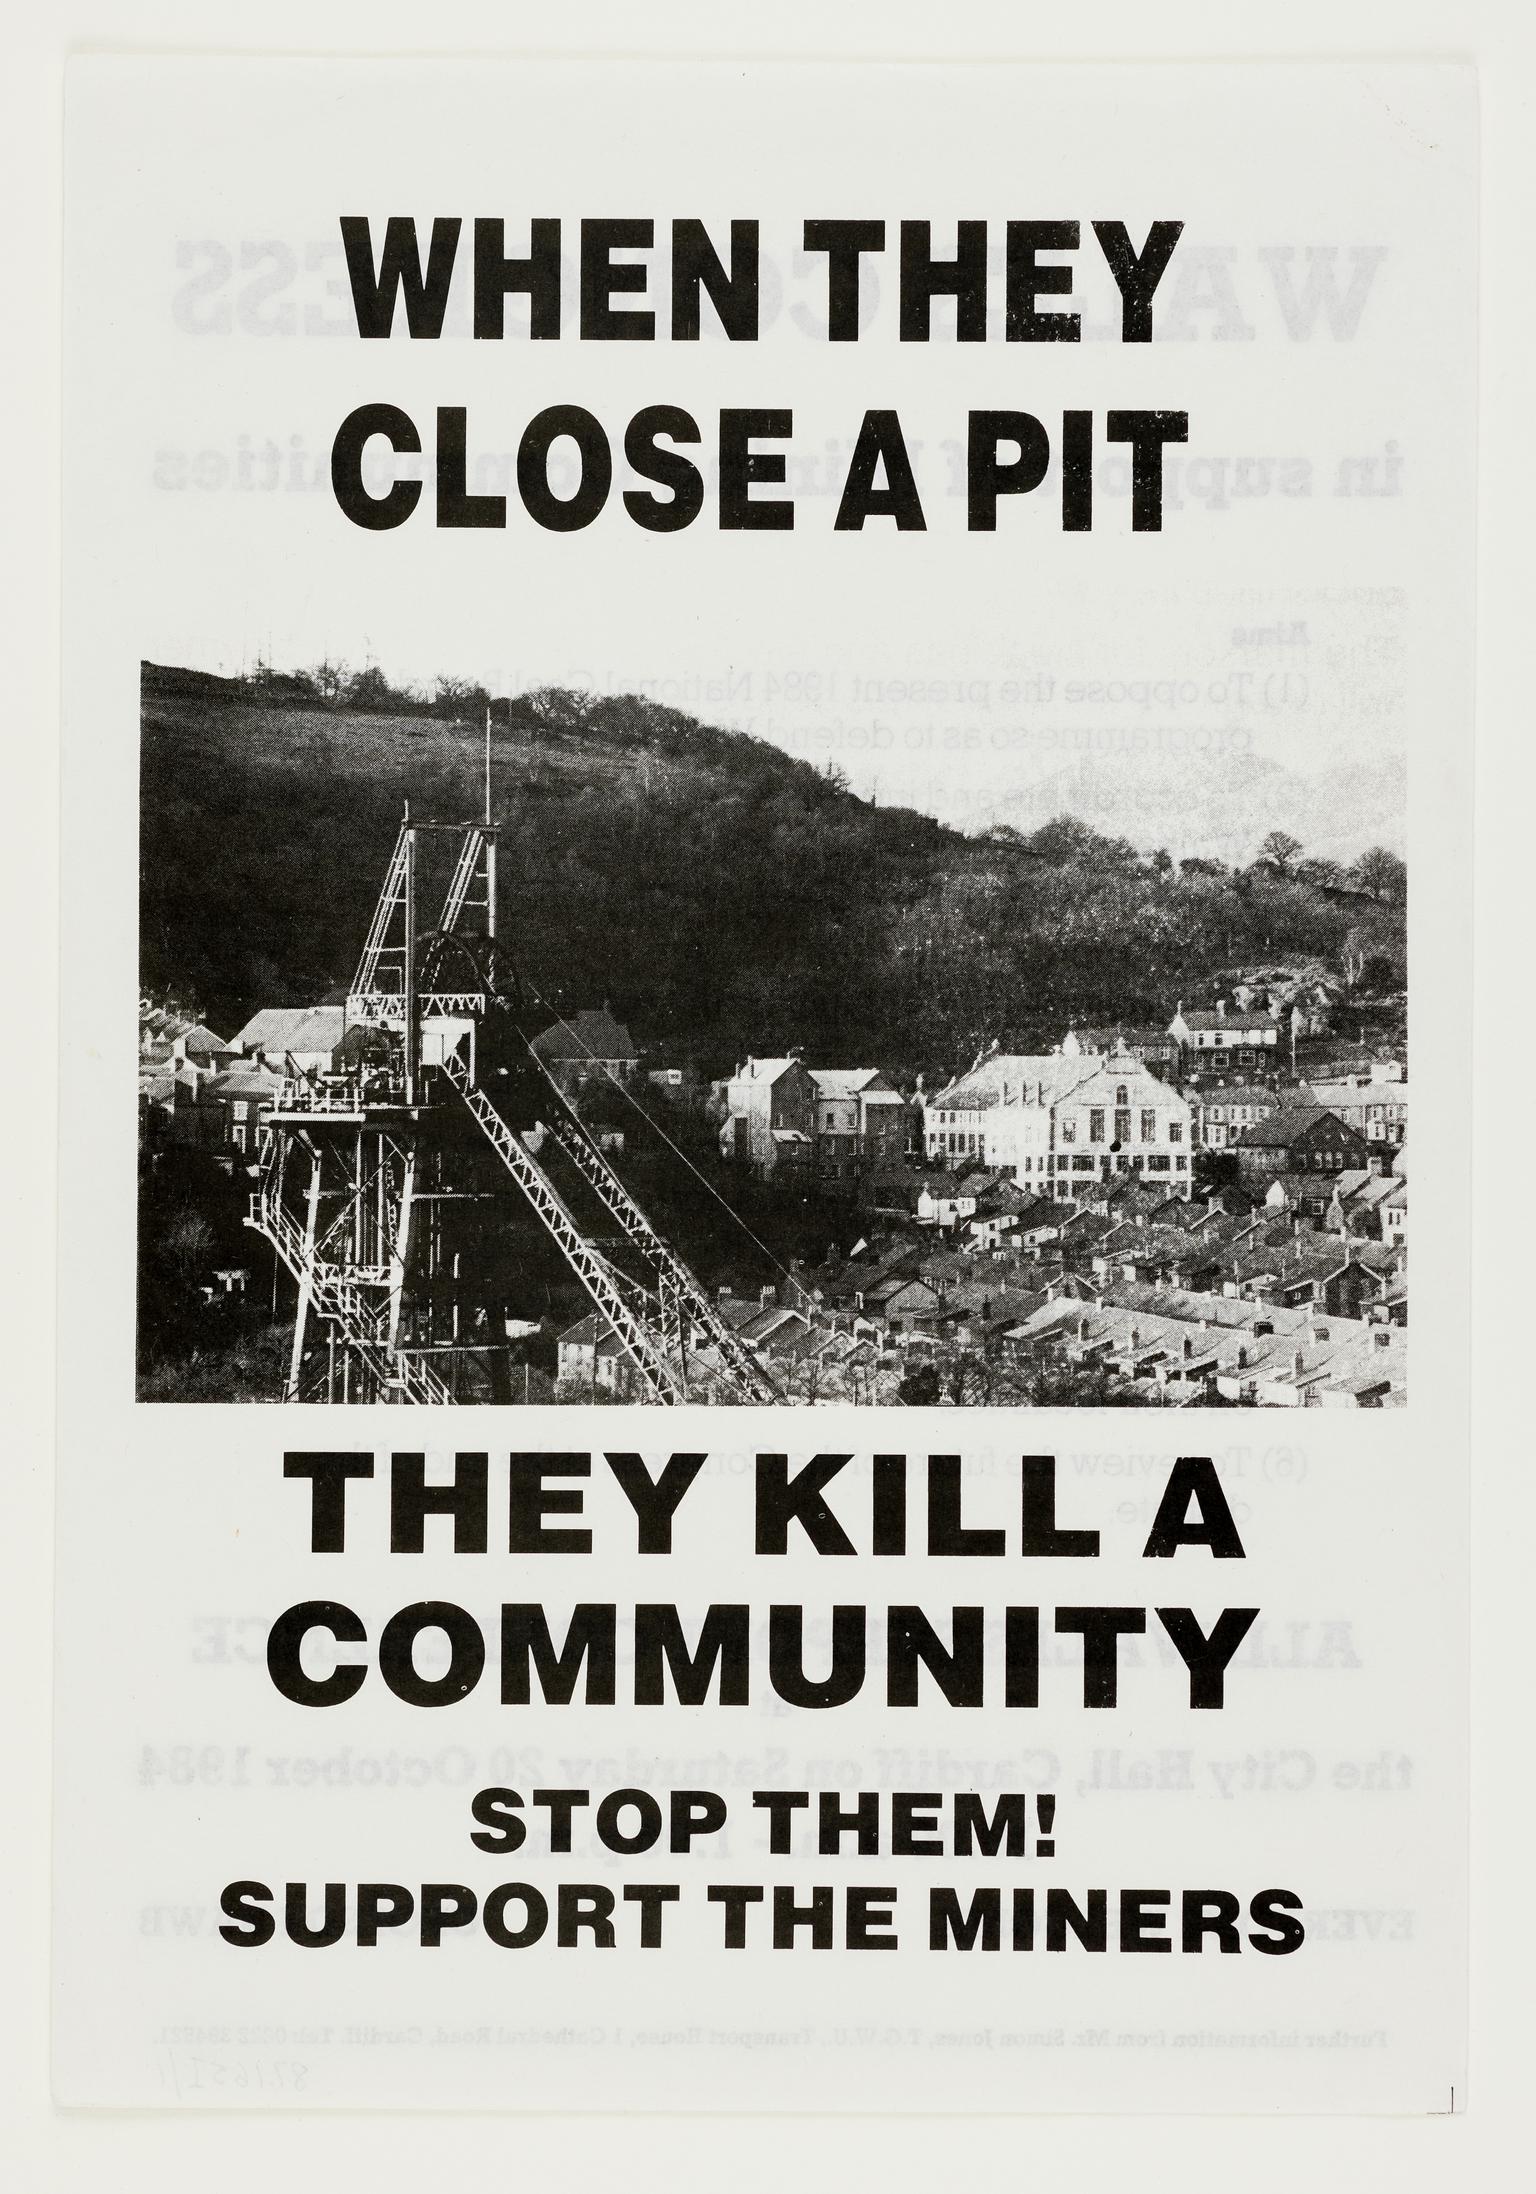 When they close a pit they kill a community (leaflet)